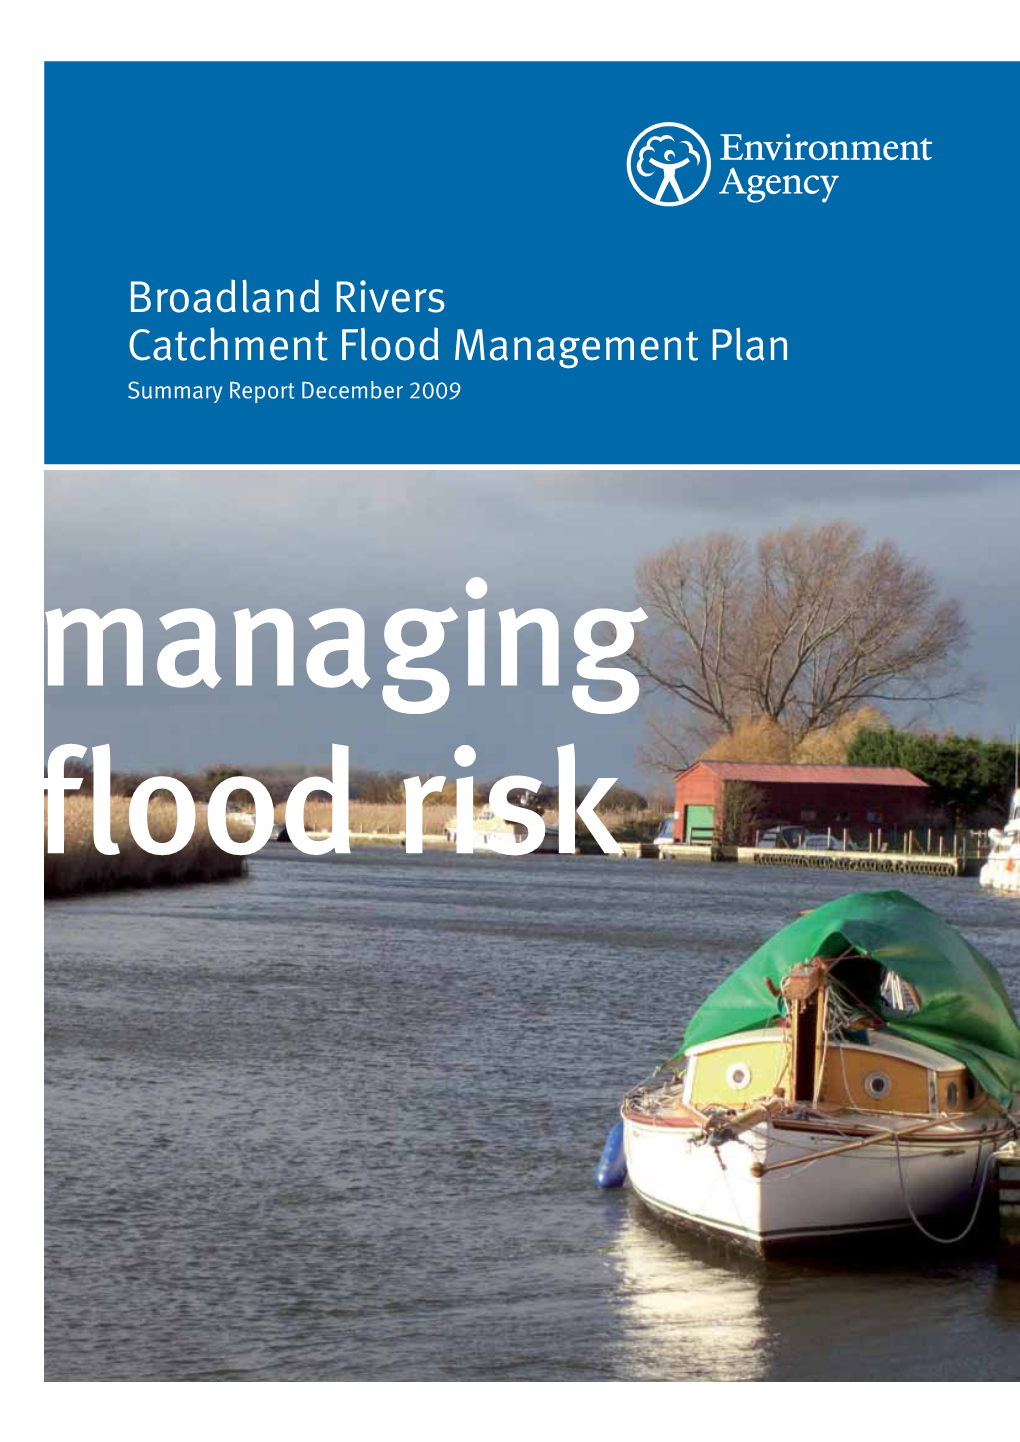 Broadland Rivers Catchment Flood Management Plan Summary Report December 2009 Managing Flood Risk We Are the Environment Agency